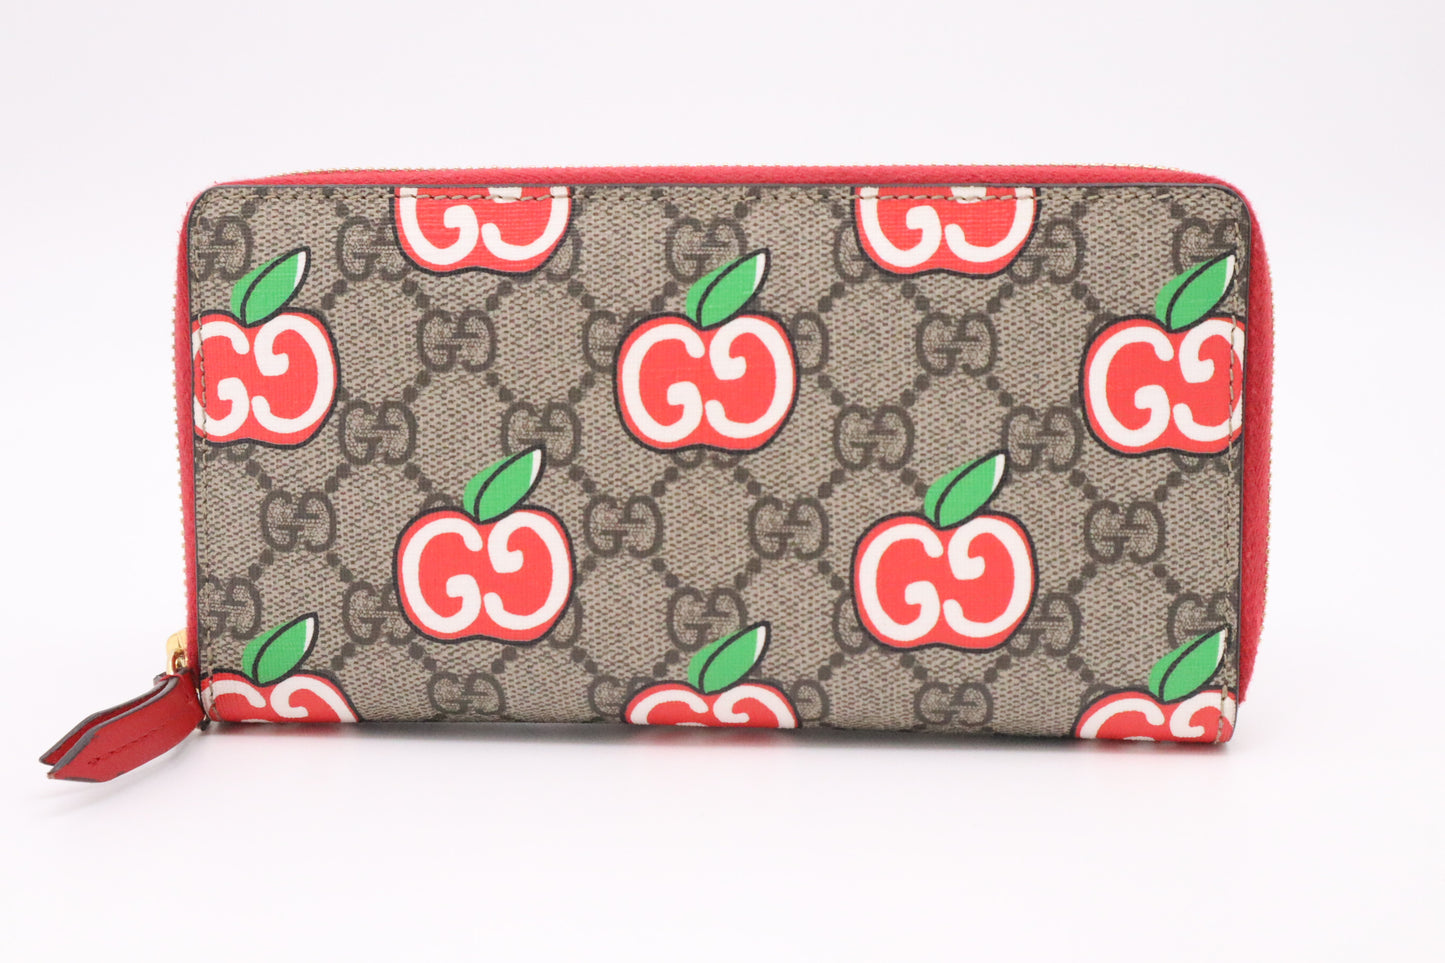 Gucci Long Wallet in GG Supreme Apples Canvas